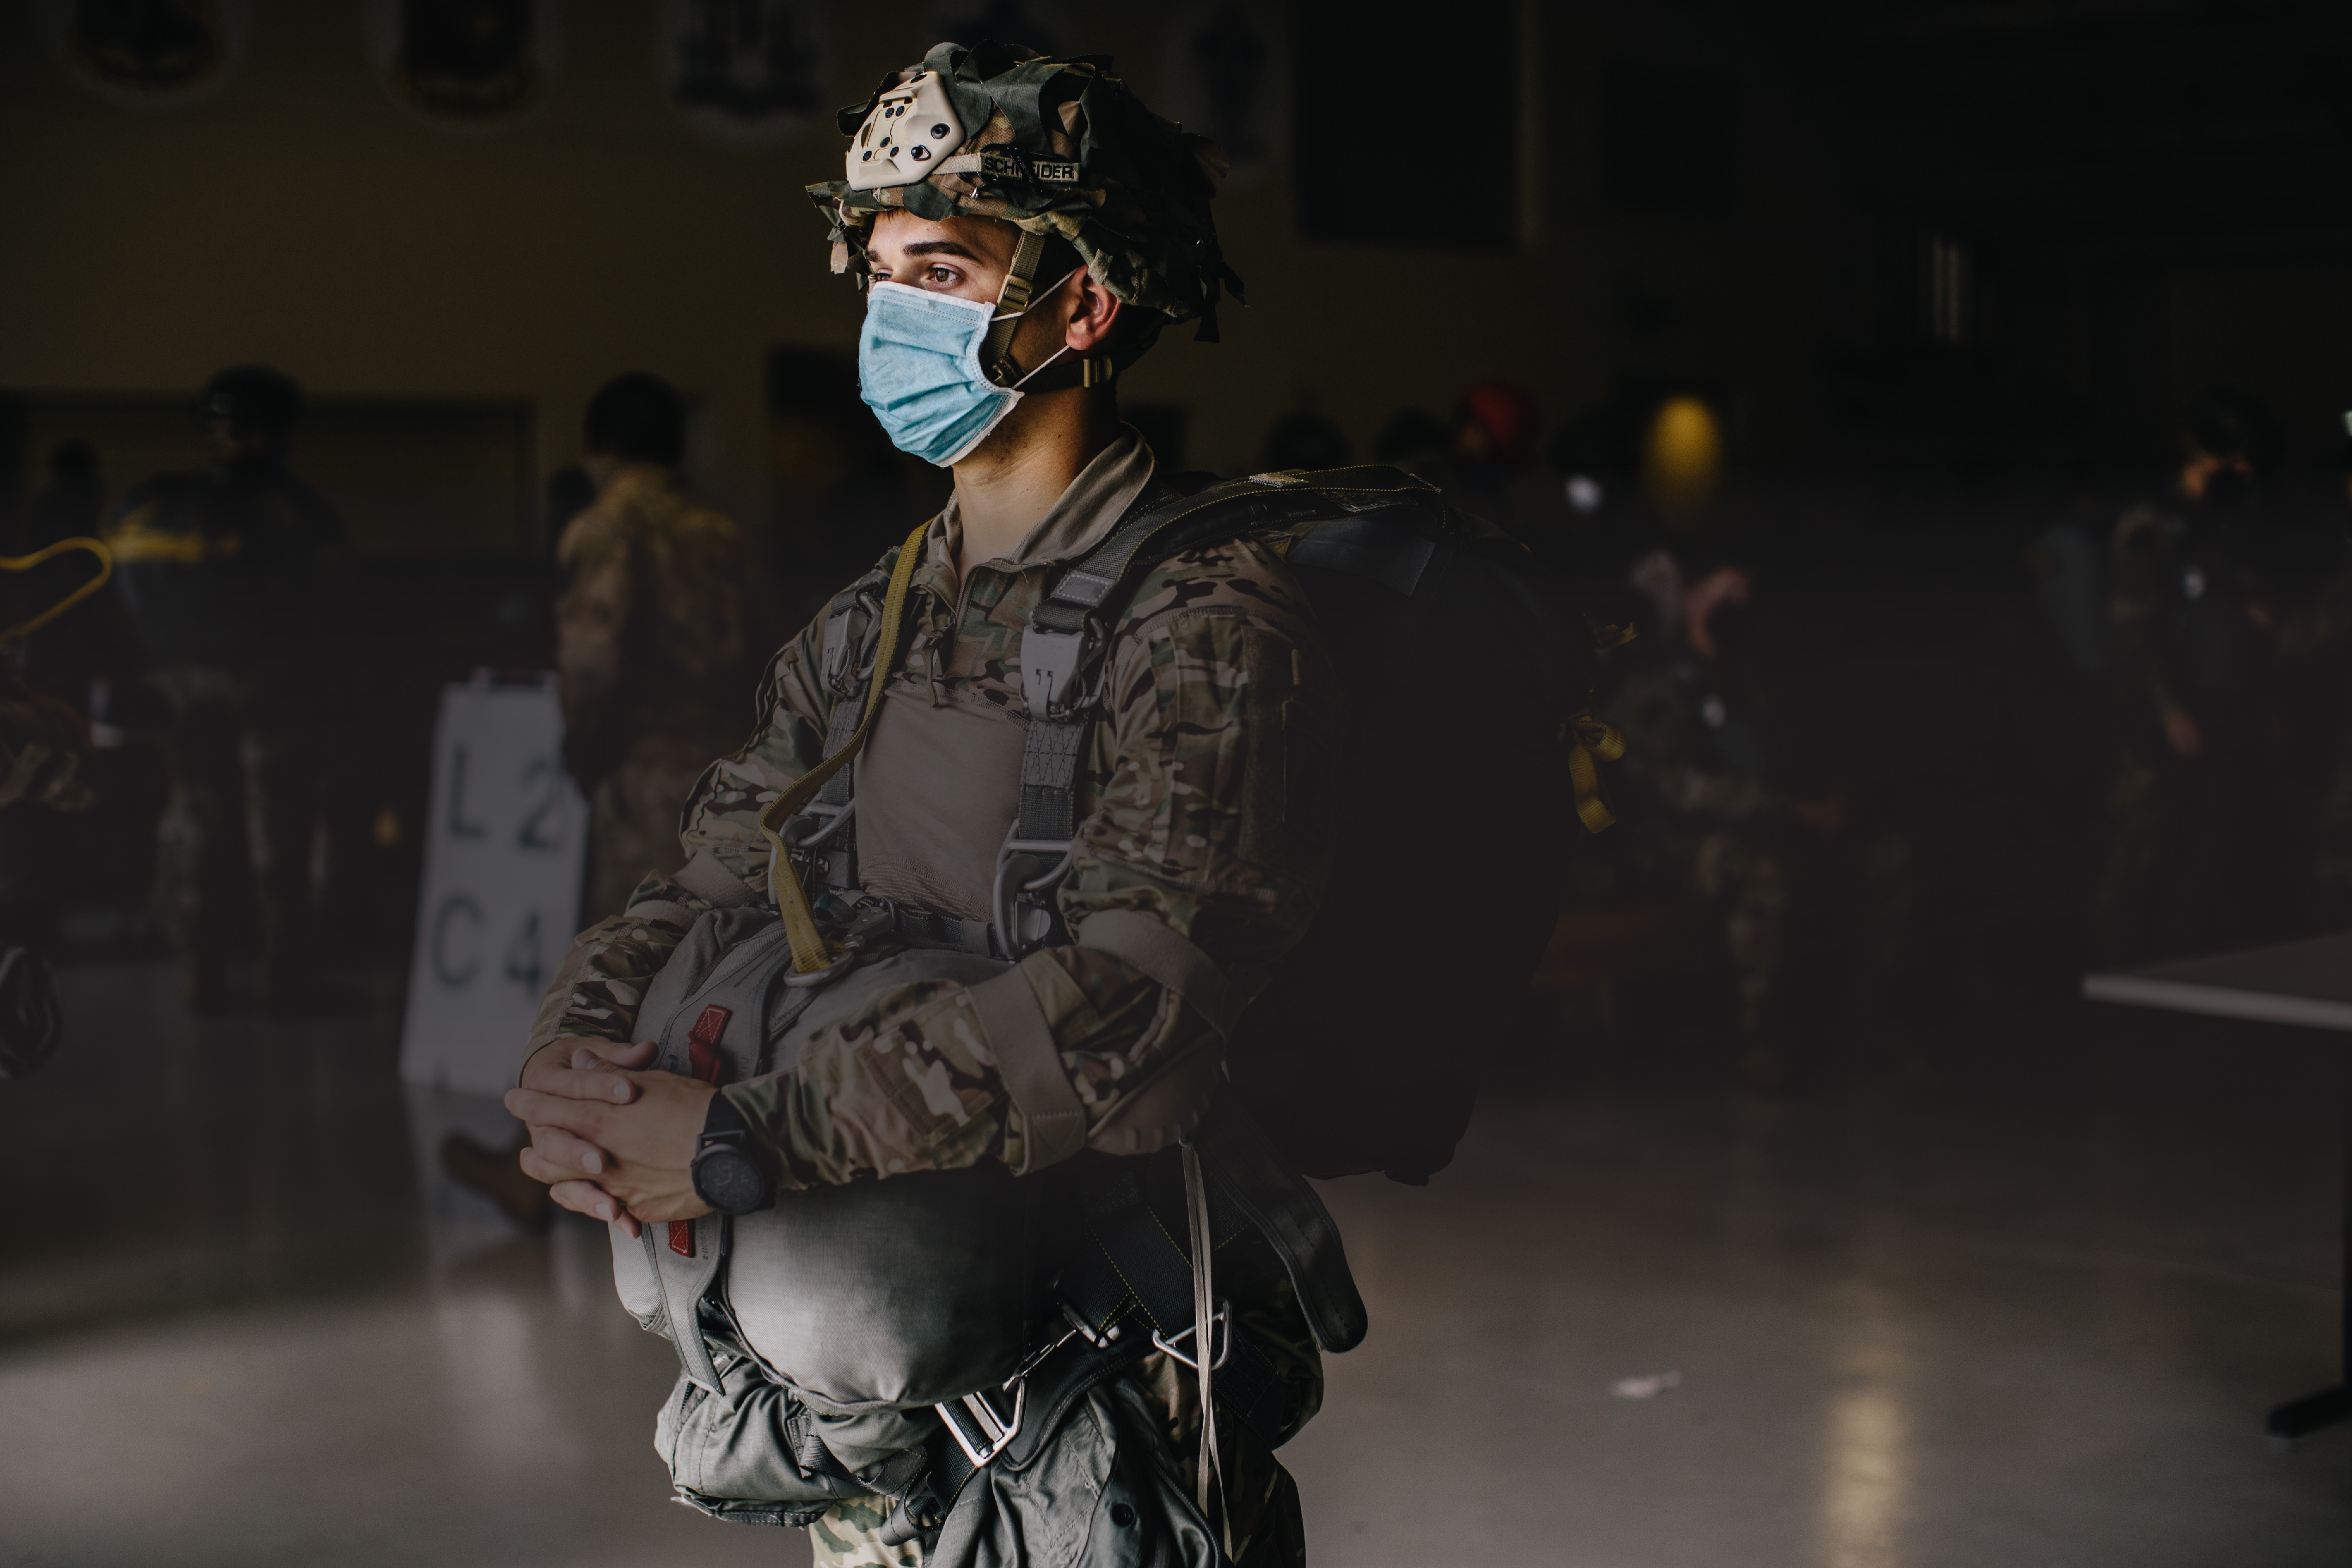 U.S. Army paratroopers wait to board an aircraft prior to an airborne operation in Aviano Air Base, Italy, June 24, 2020. (U.S. Army photo by Spc. Ryan Lucas)